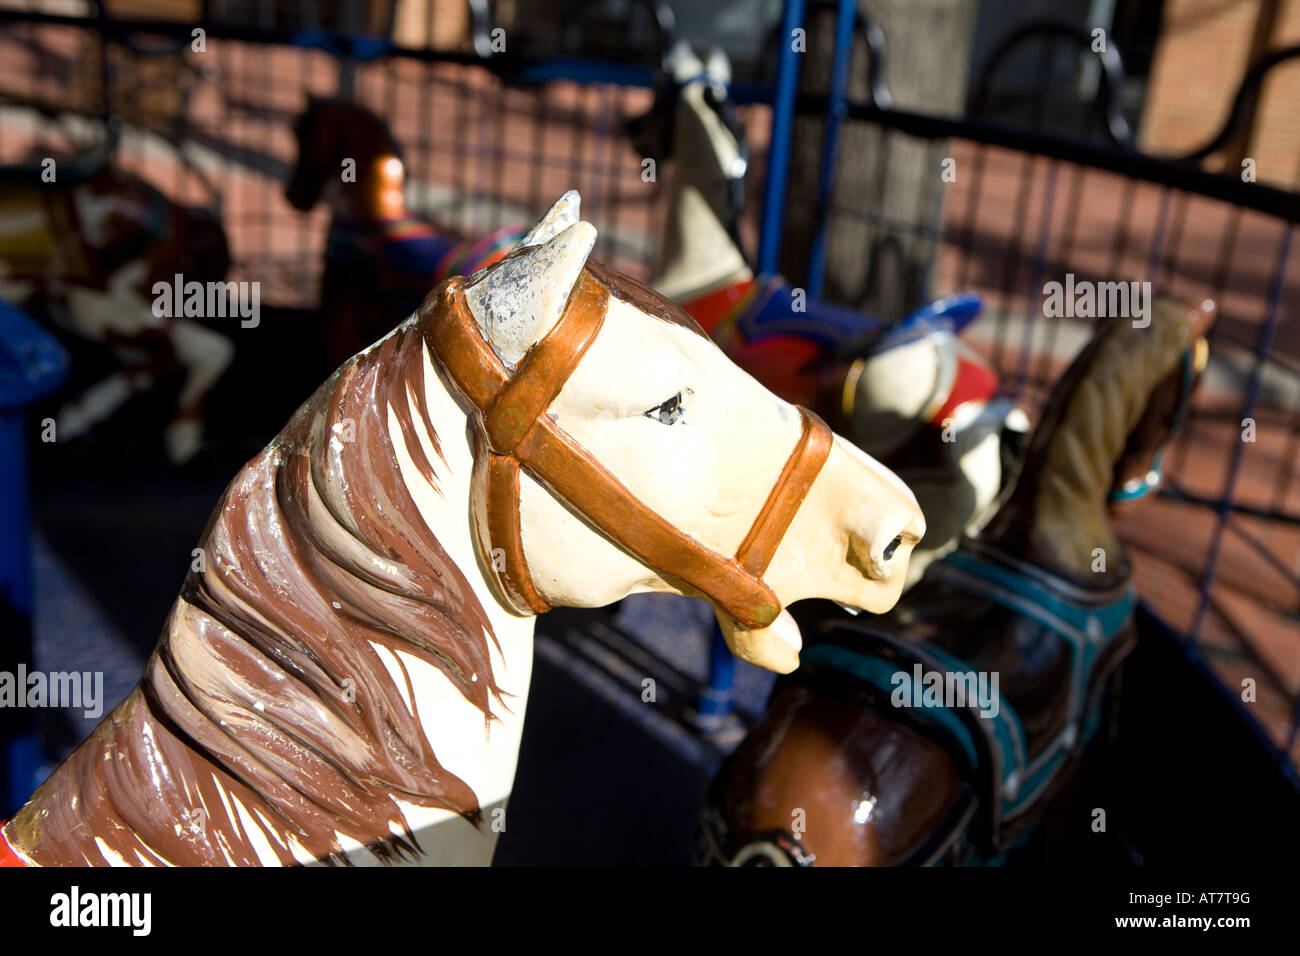 A horse on a child's carousel ride on the downtown mall in Charlottesville Virginia February 19 2008 Stock Photo